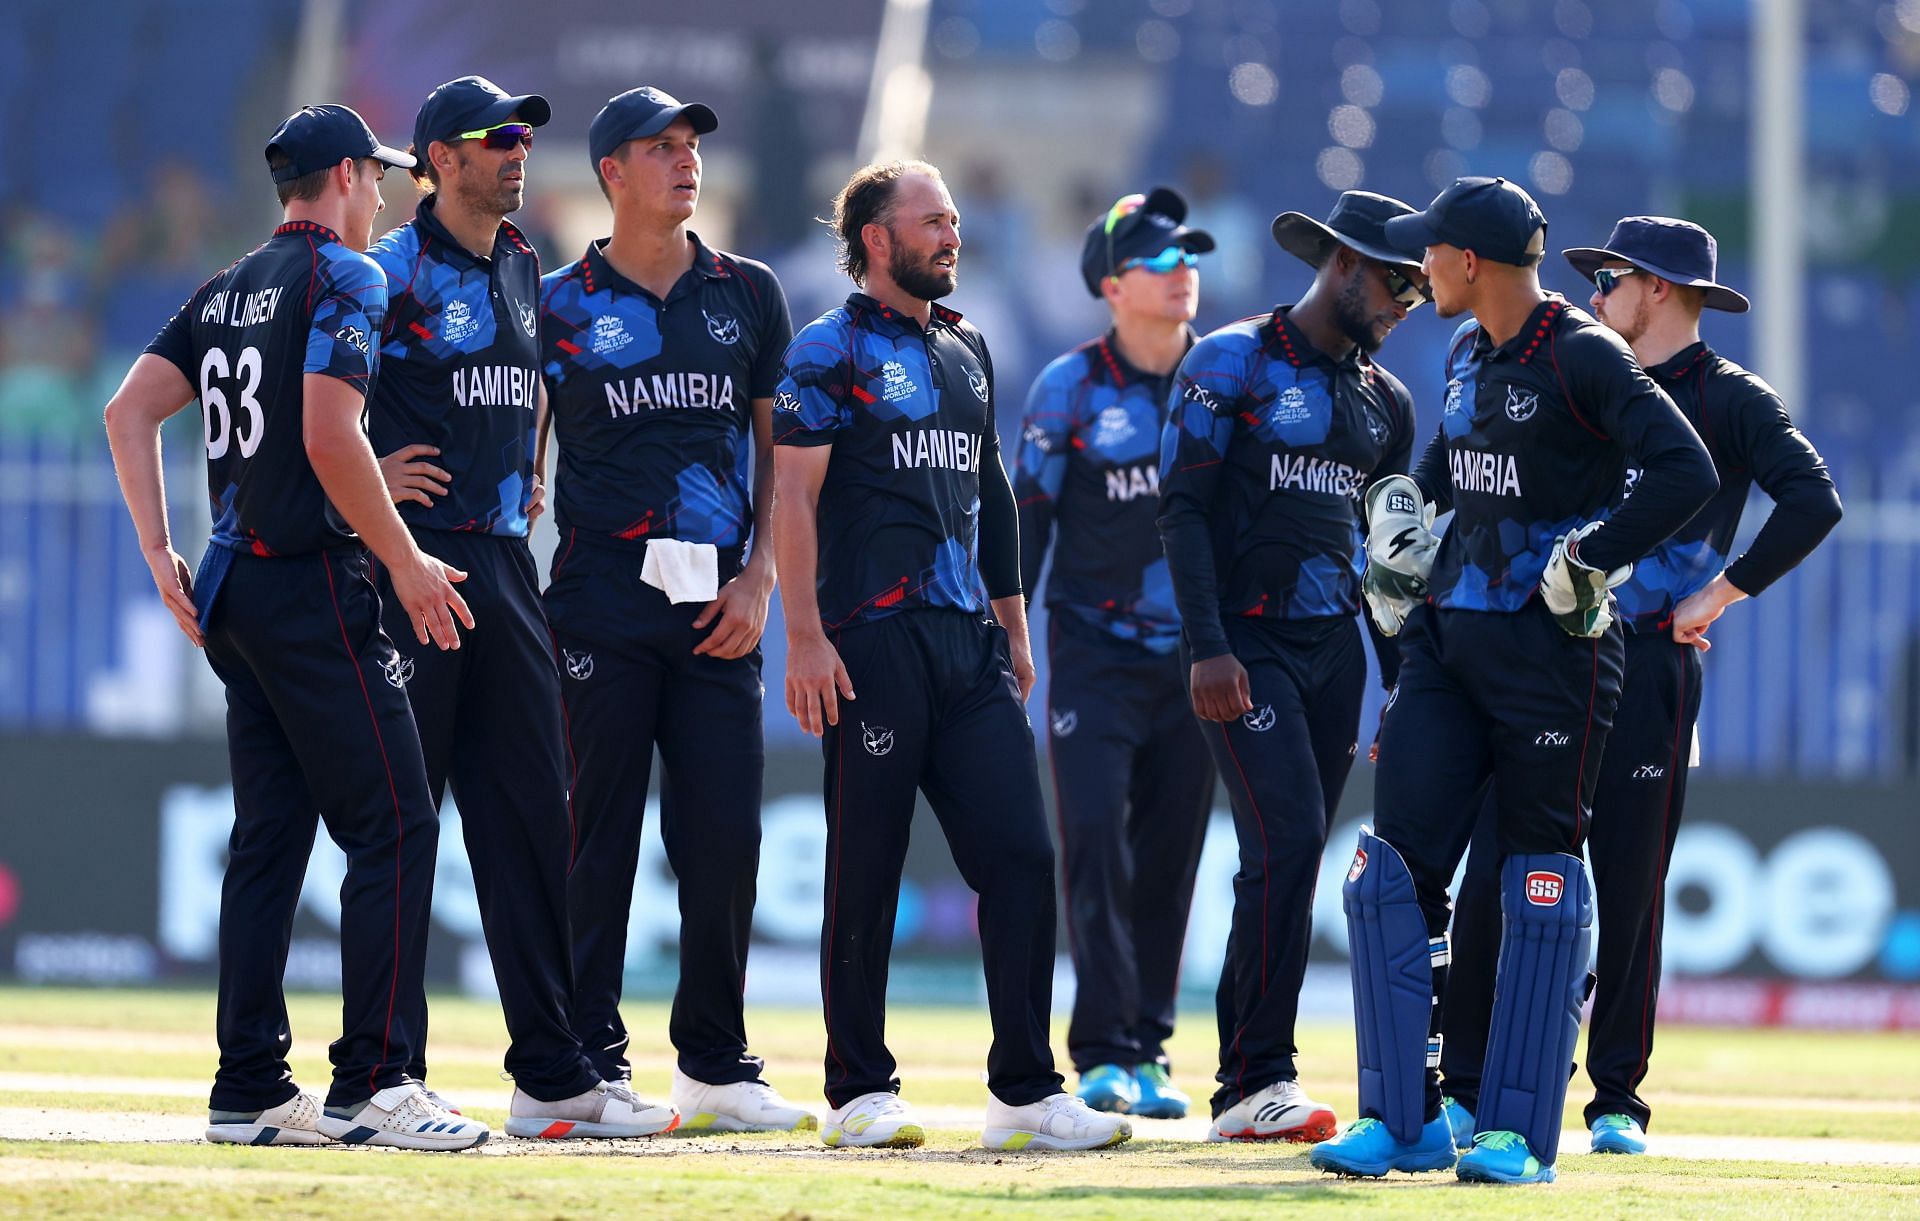 Namibia Cricket Team in action during the T20 World Cup 2021 (Image: ICC via Getty Images)